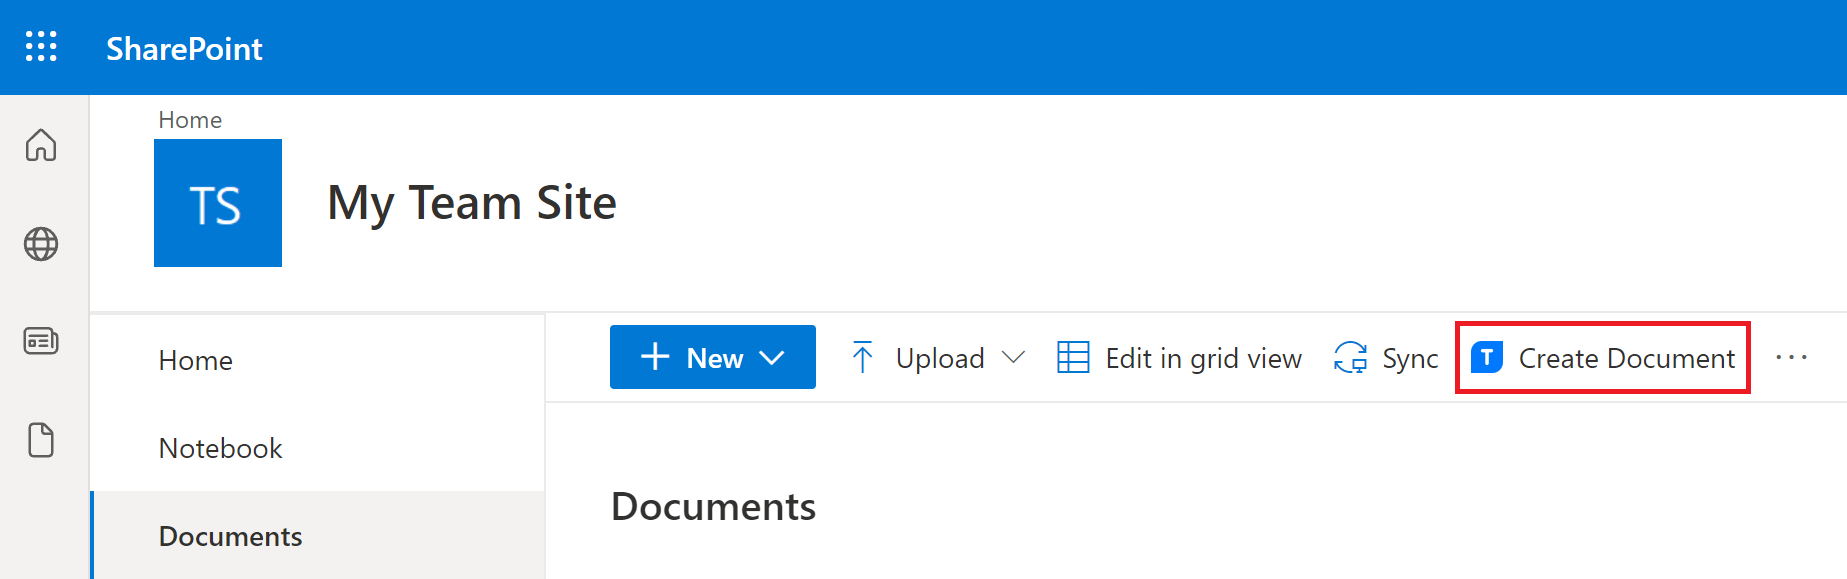 1_sharepoint_createdocument.png